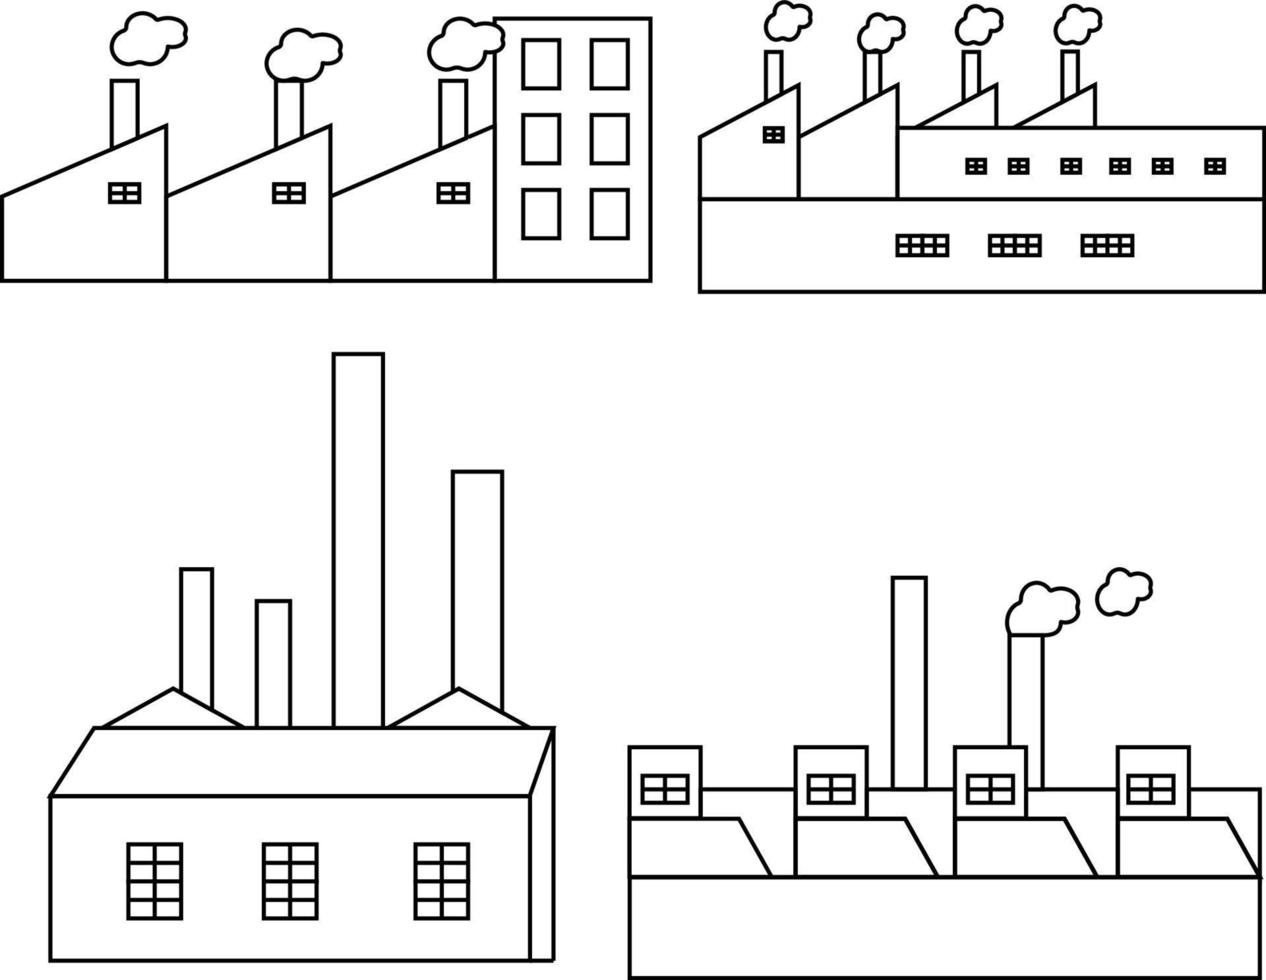 Factory icon set. Vector industrial buildings pictograms. Black silhouettes Set of four contours of plants for industrial design.